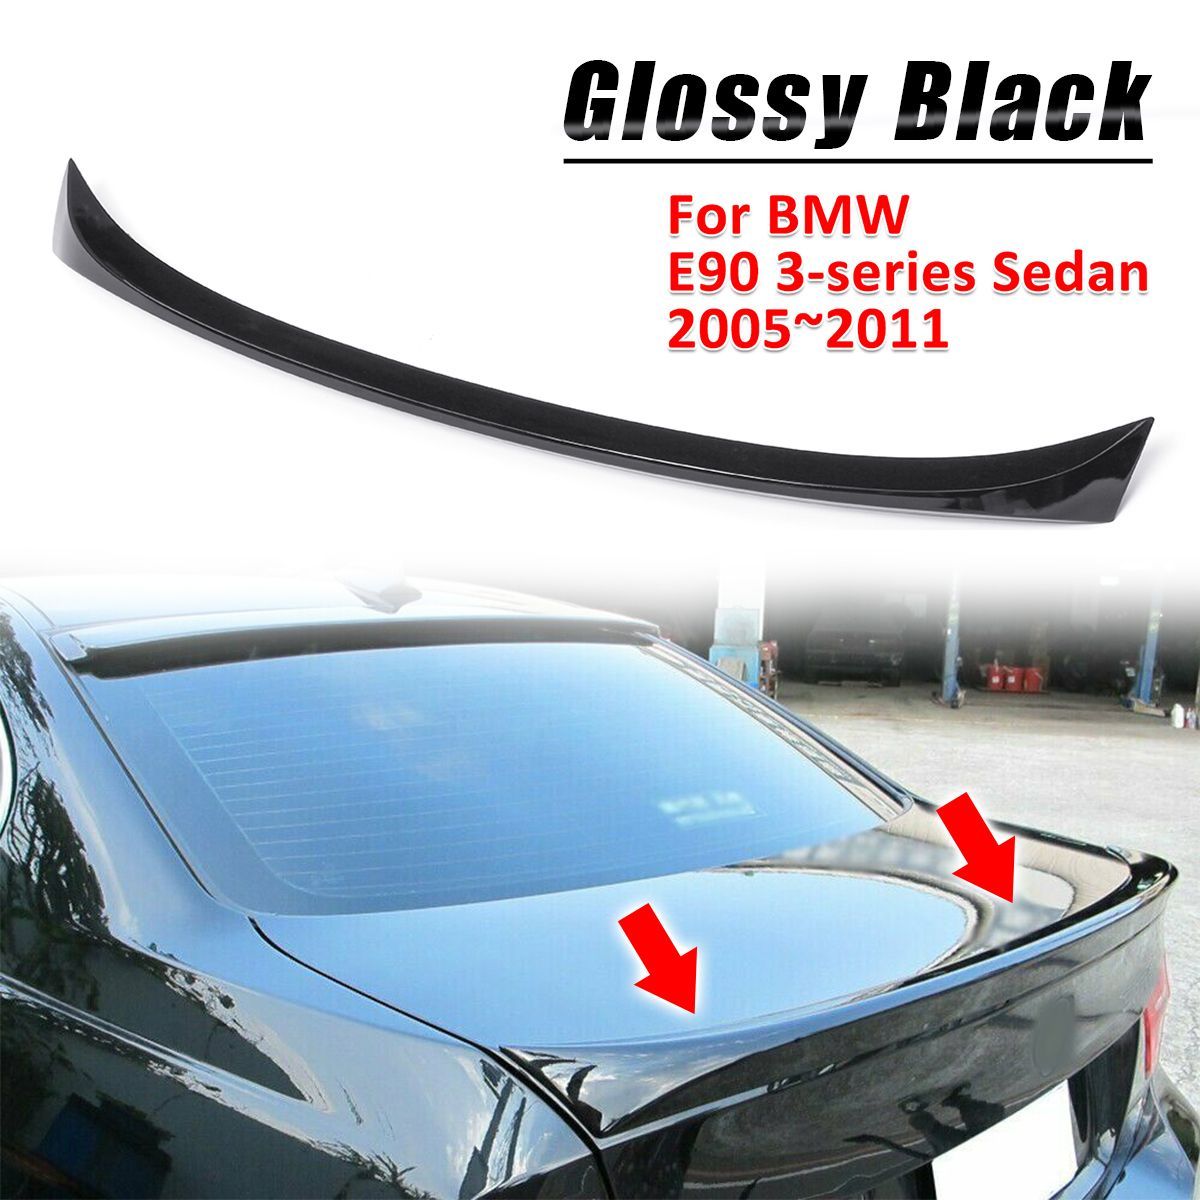 ABS-OE-Type-Rear-Trunk-Spoiler-Wing-Painted-Glossy-Black-For-BMW-E90-3-series-Sedan-2005-2011-1697915